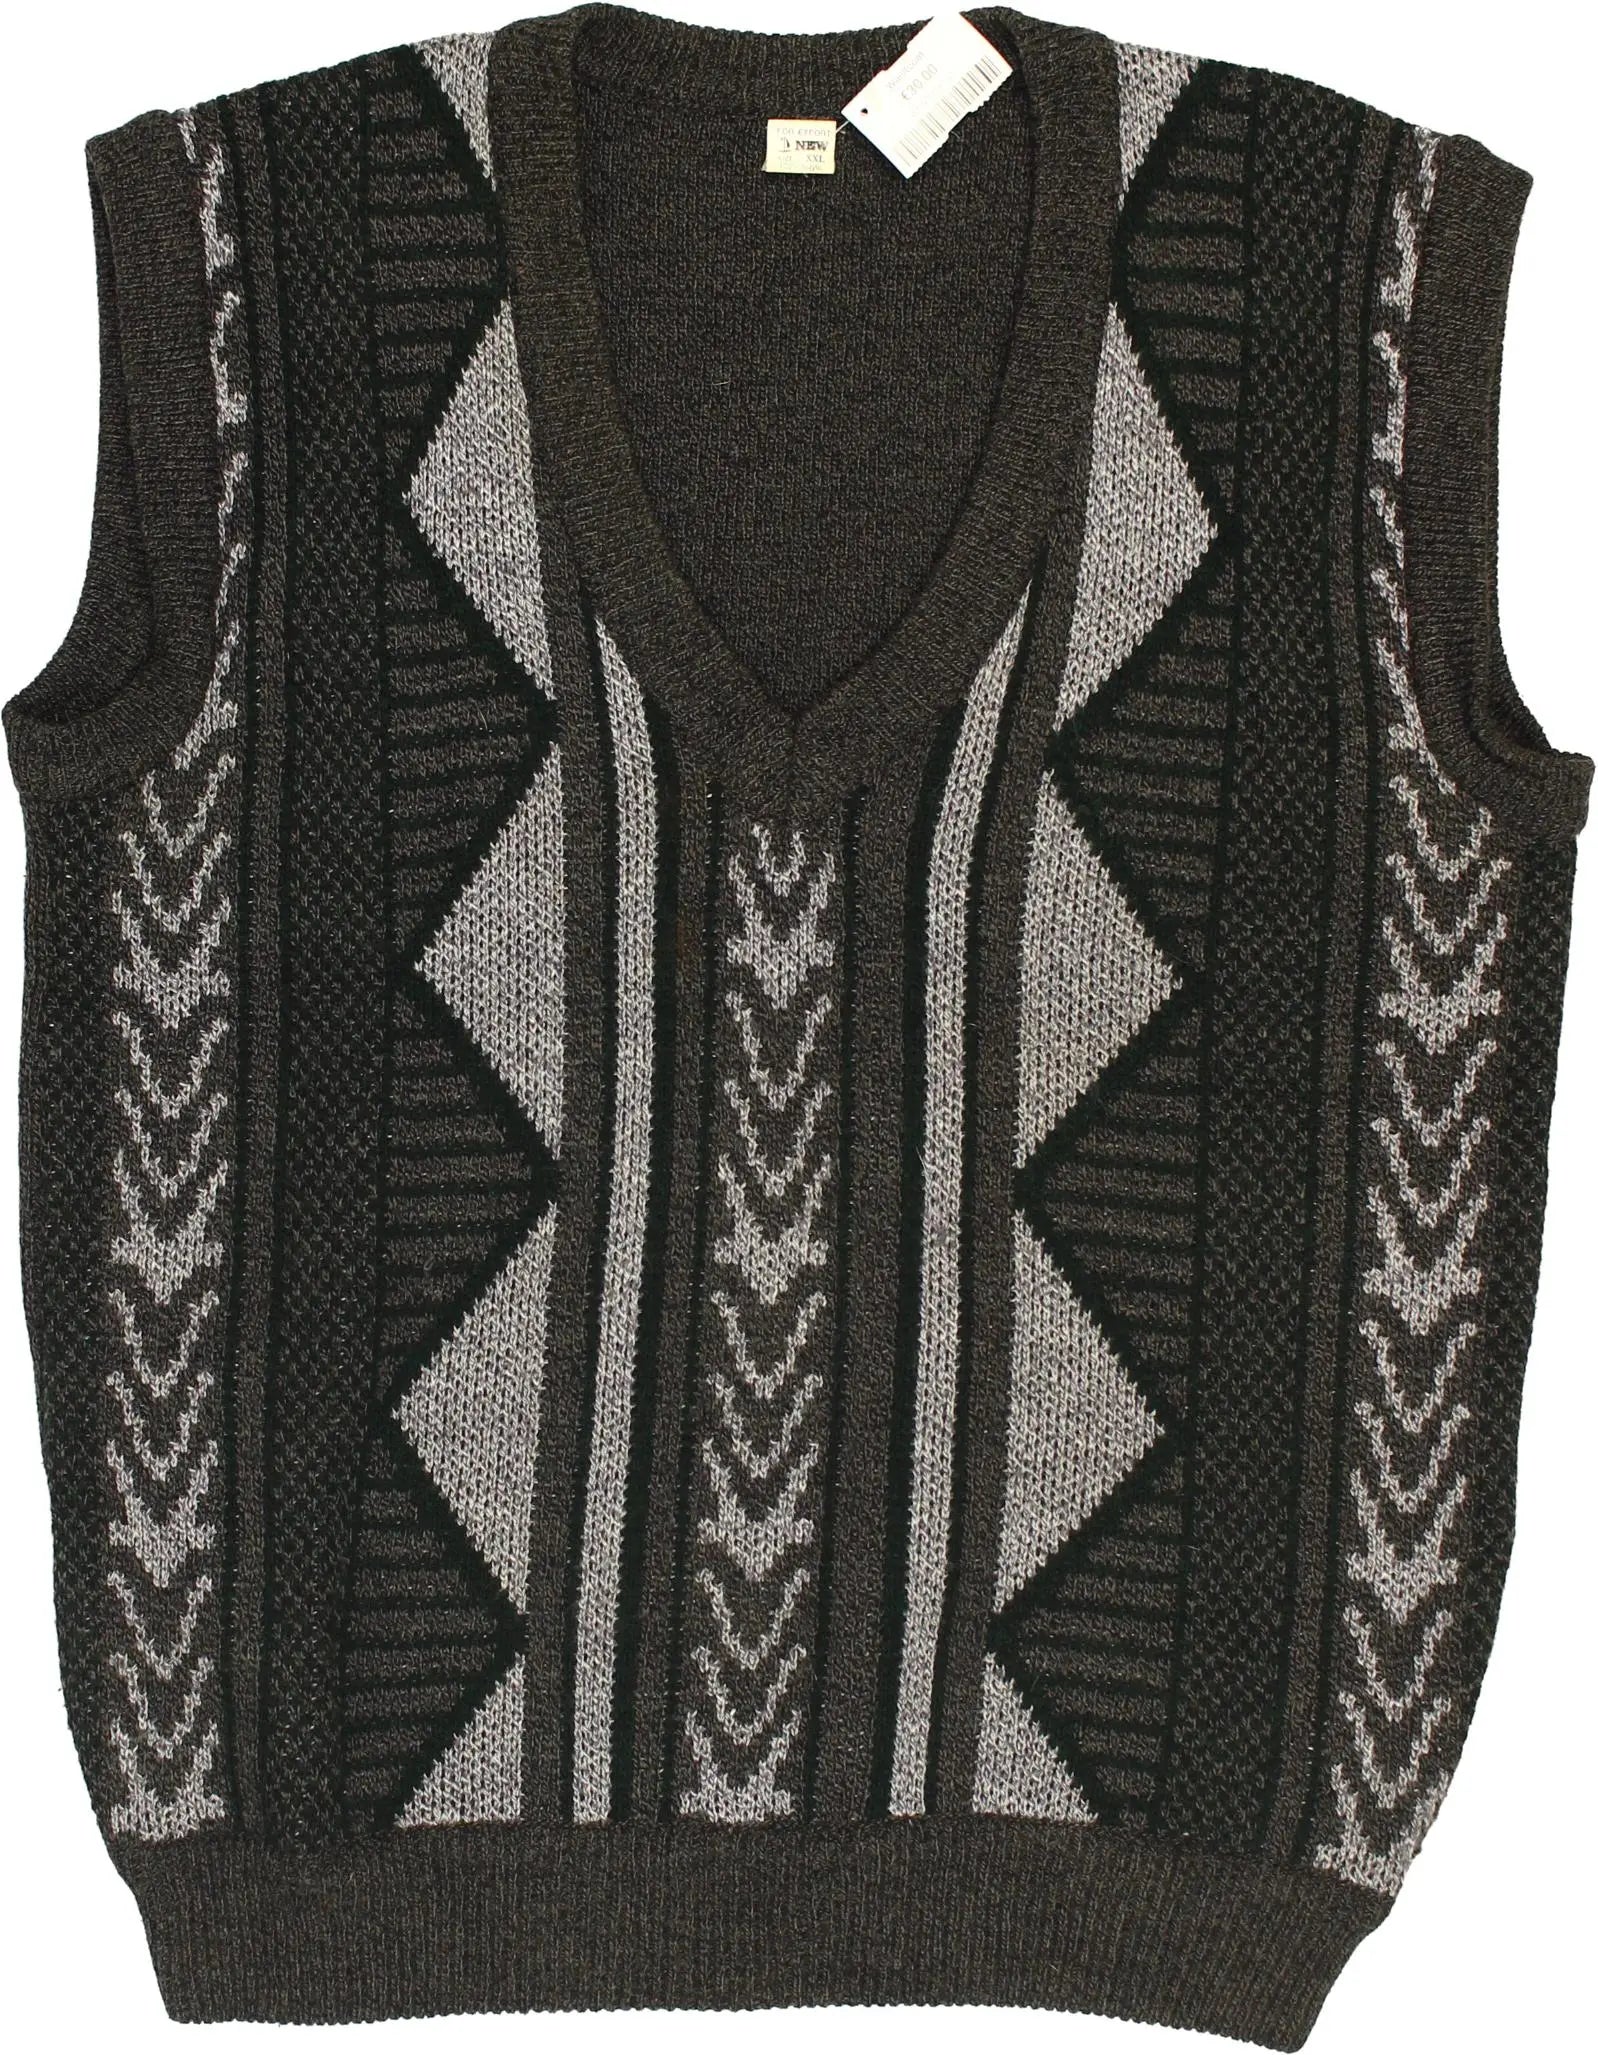 Unknown - 90's Waistcoat- ThriftTale.com - Vintage and second handclothing